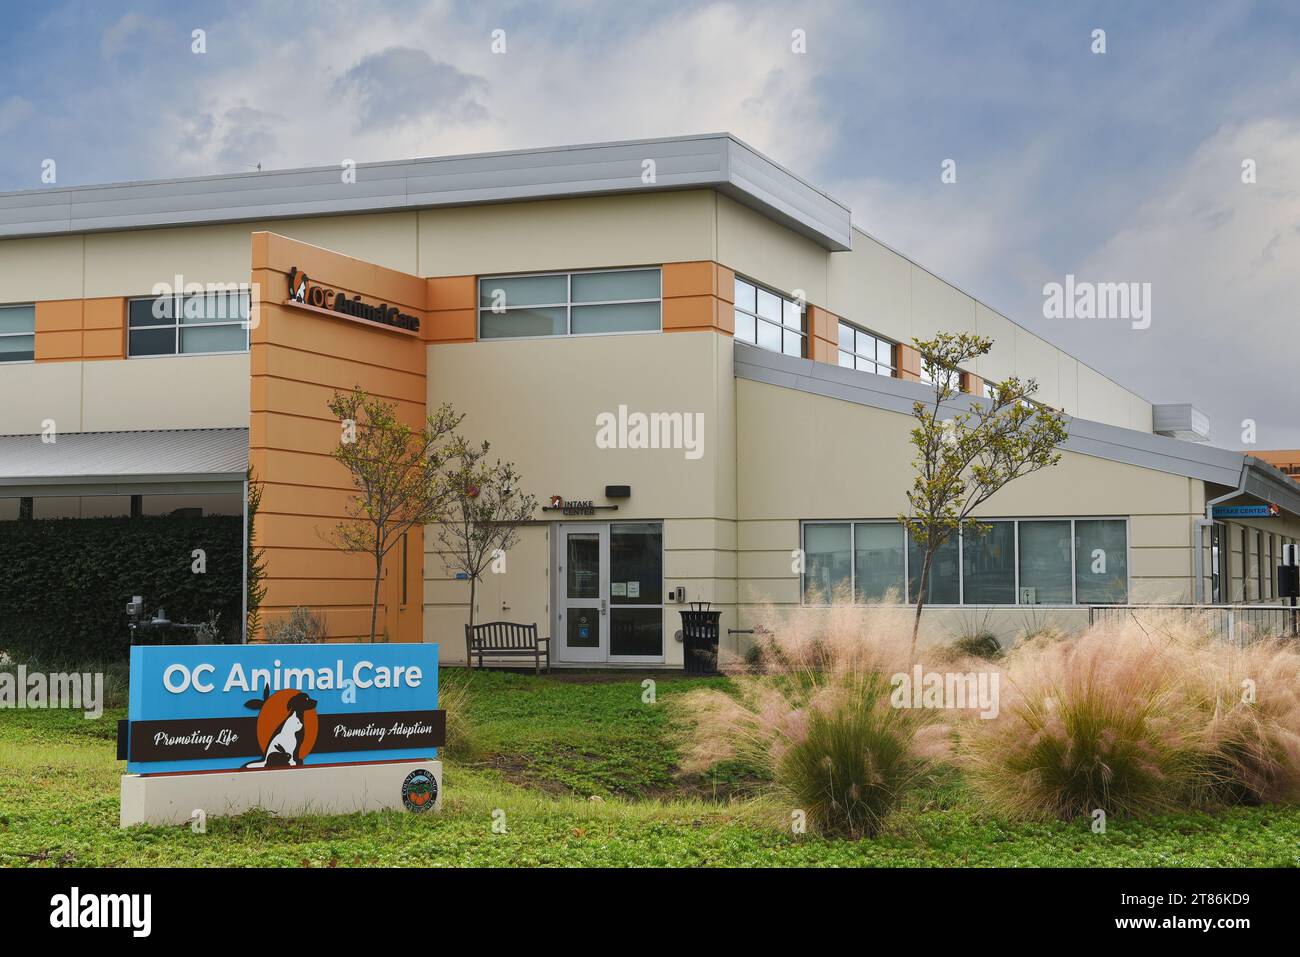 TUSTIN, CALIFORNIA - 18 NOV 2023: The OC Animal Care Center on Victory Rd, Tustin, provides temporary shelter and medical care for lost and stray anim Stock Photo